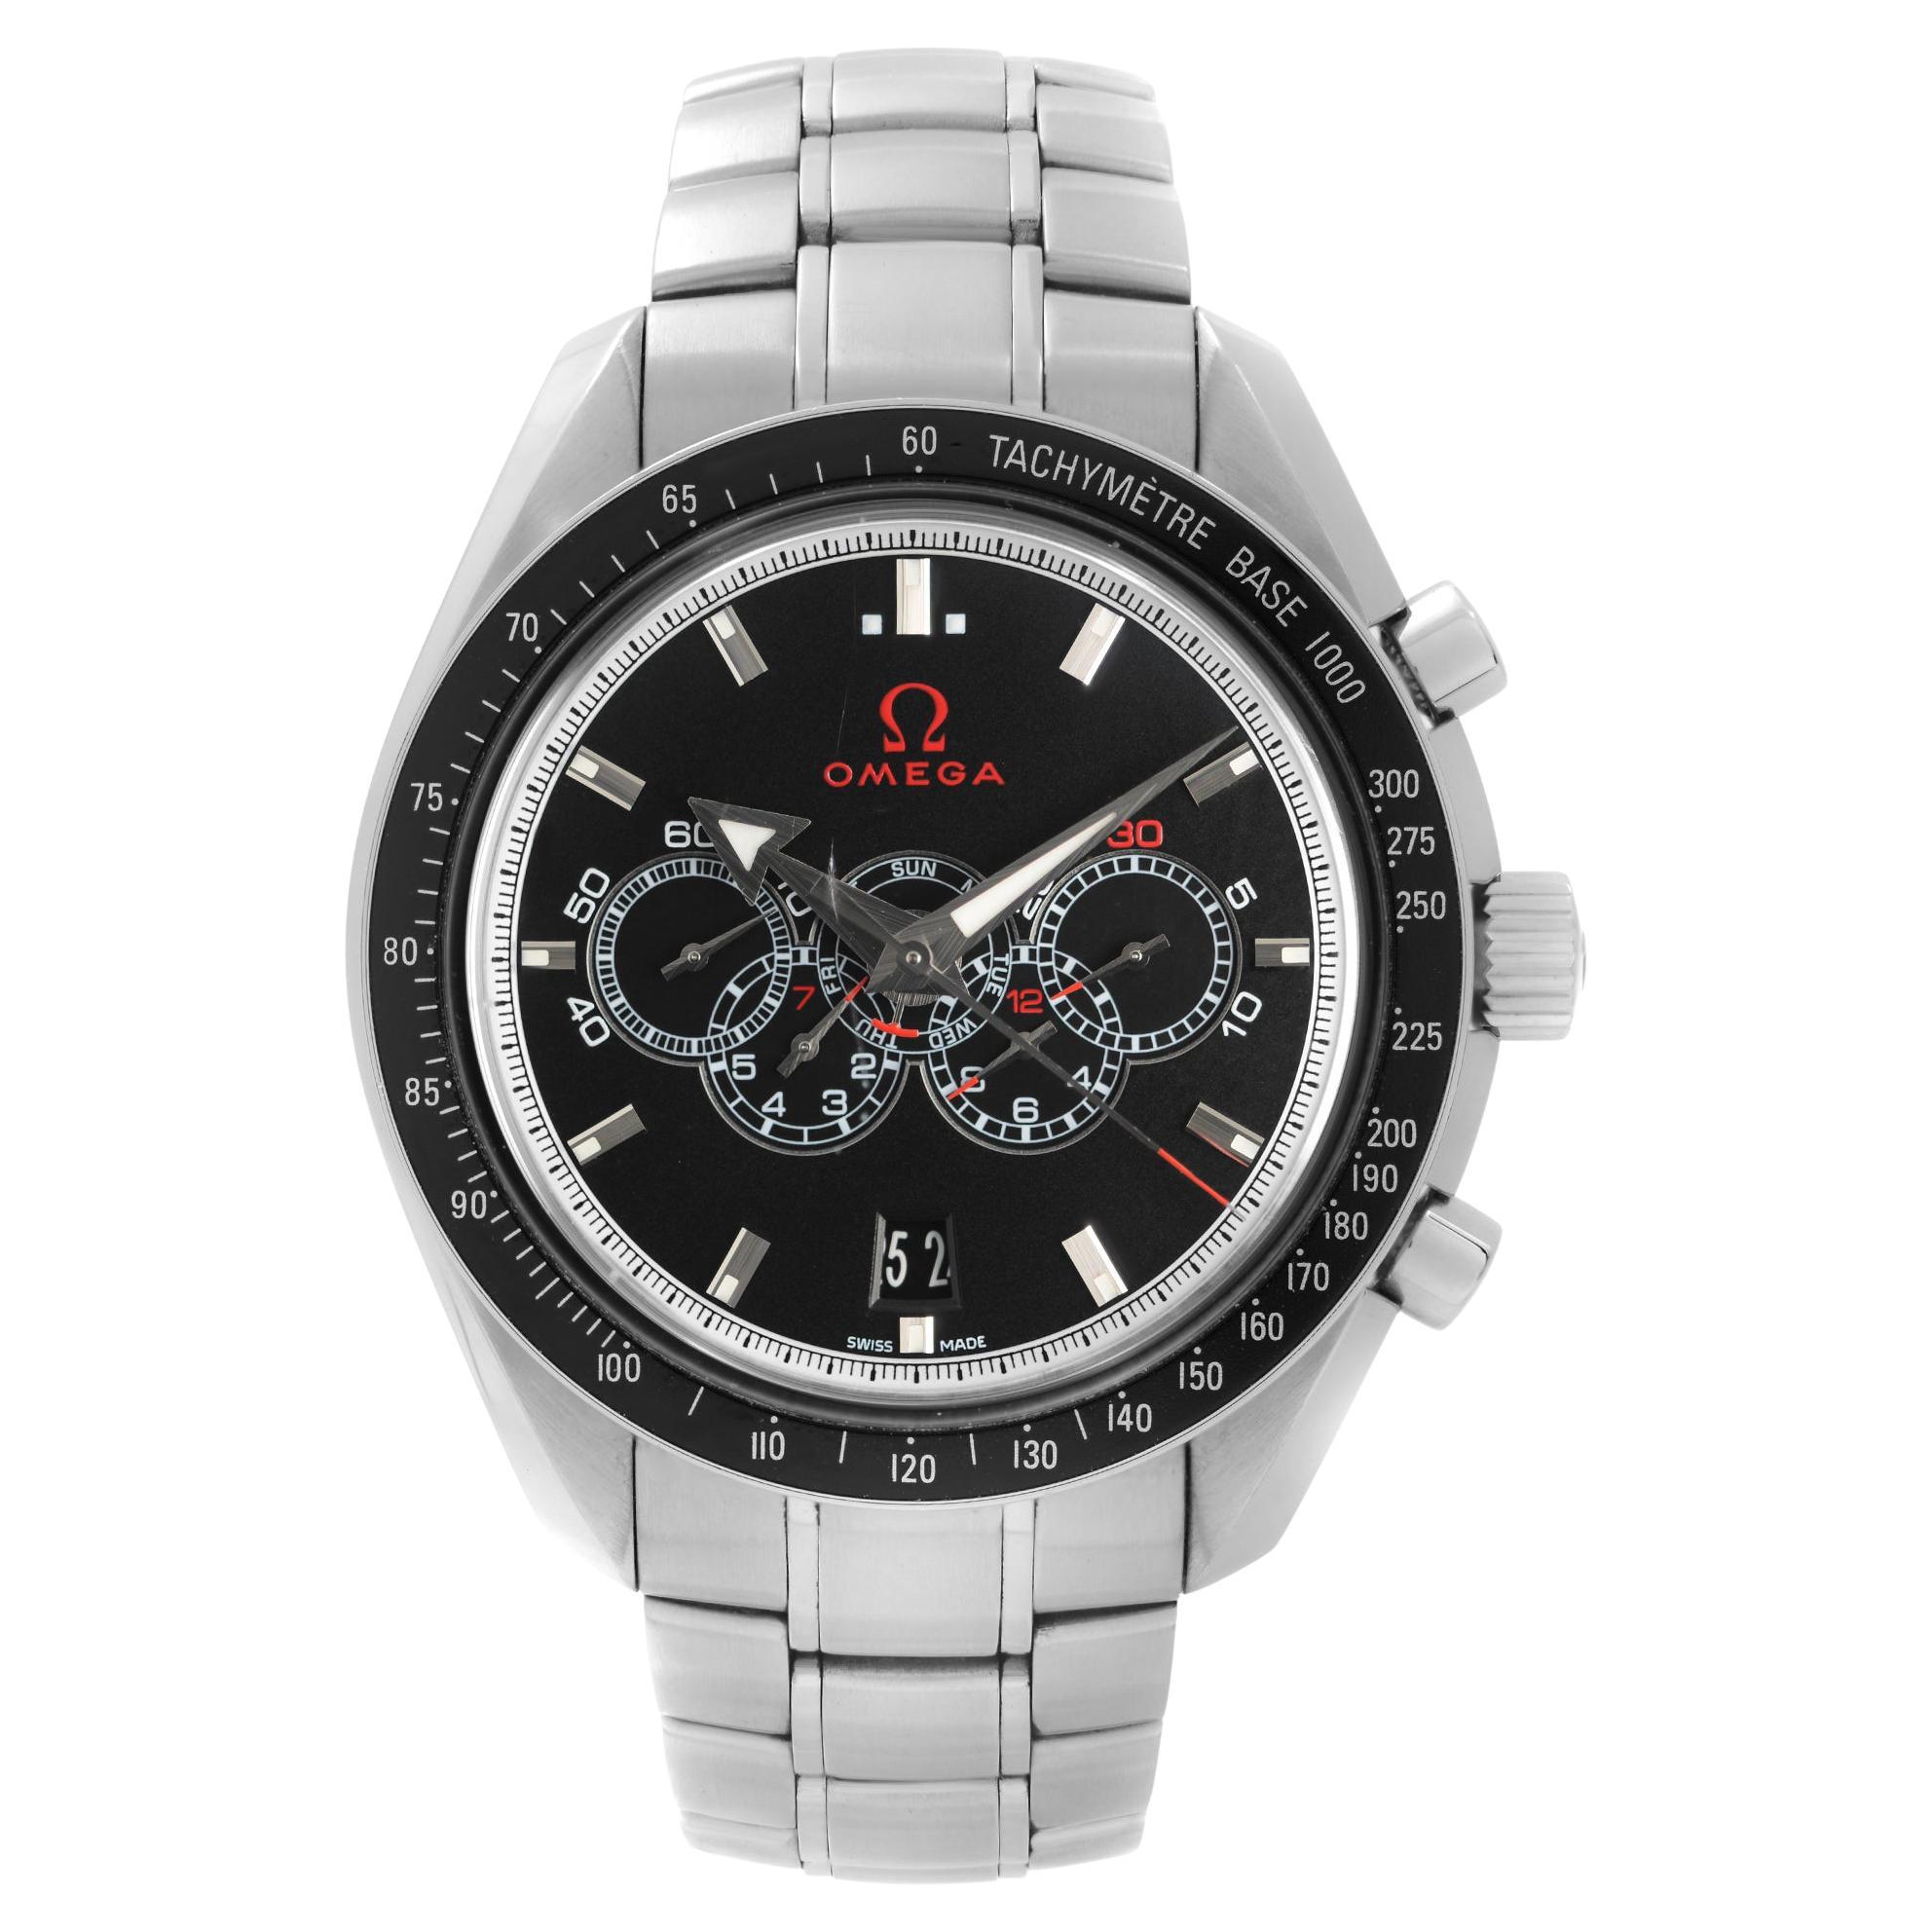 Omega Speedmaster Olympic Day Date Black Automatic Watch 321.30.44.52.01.001 For Sale